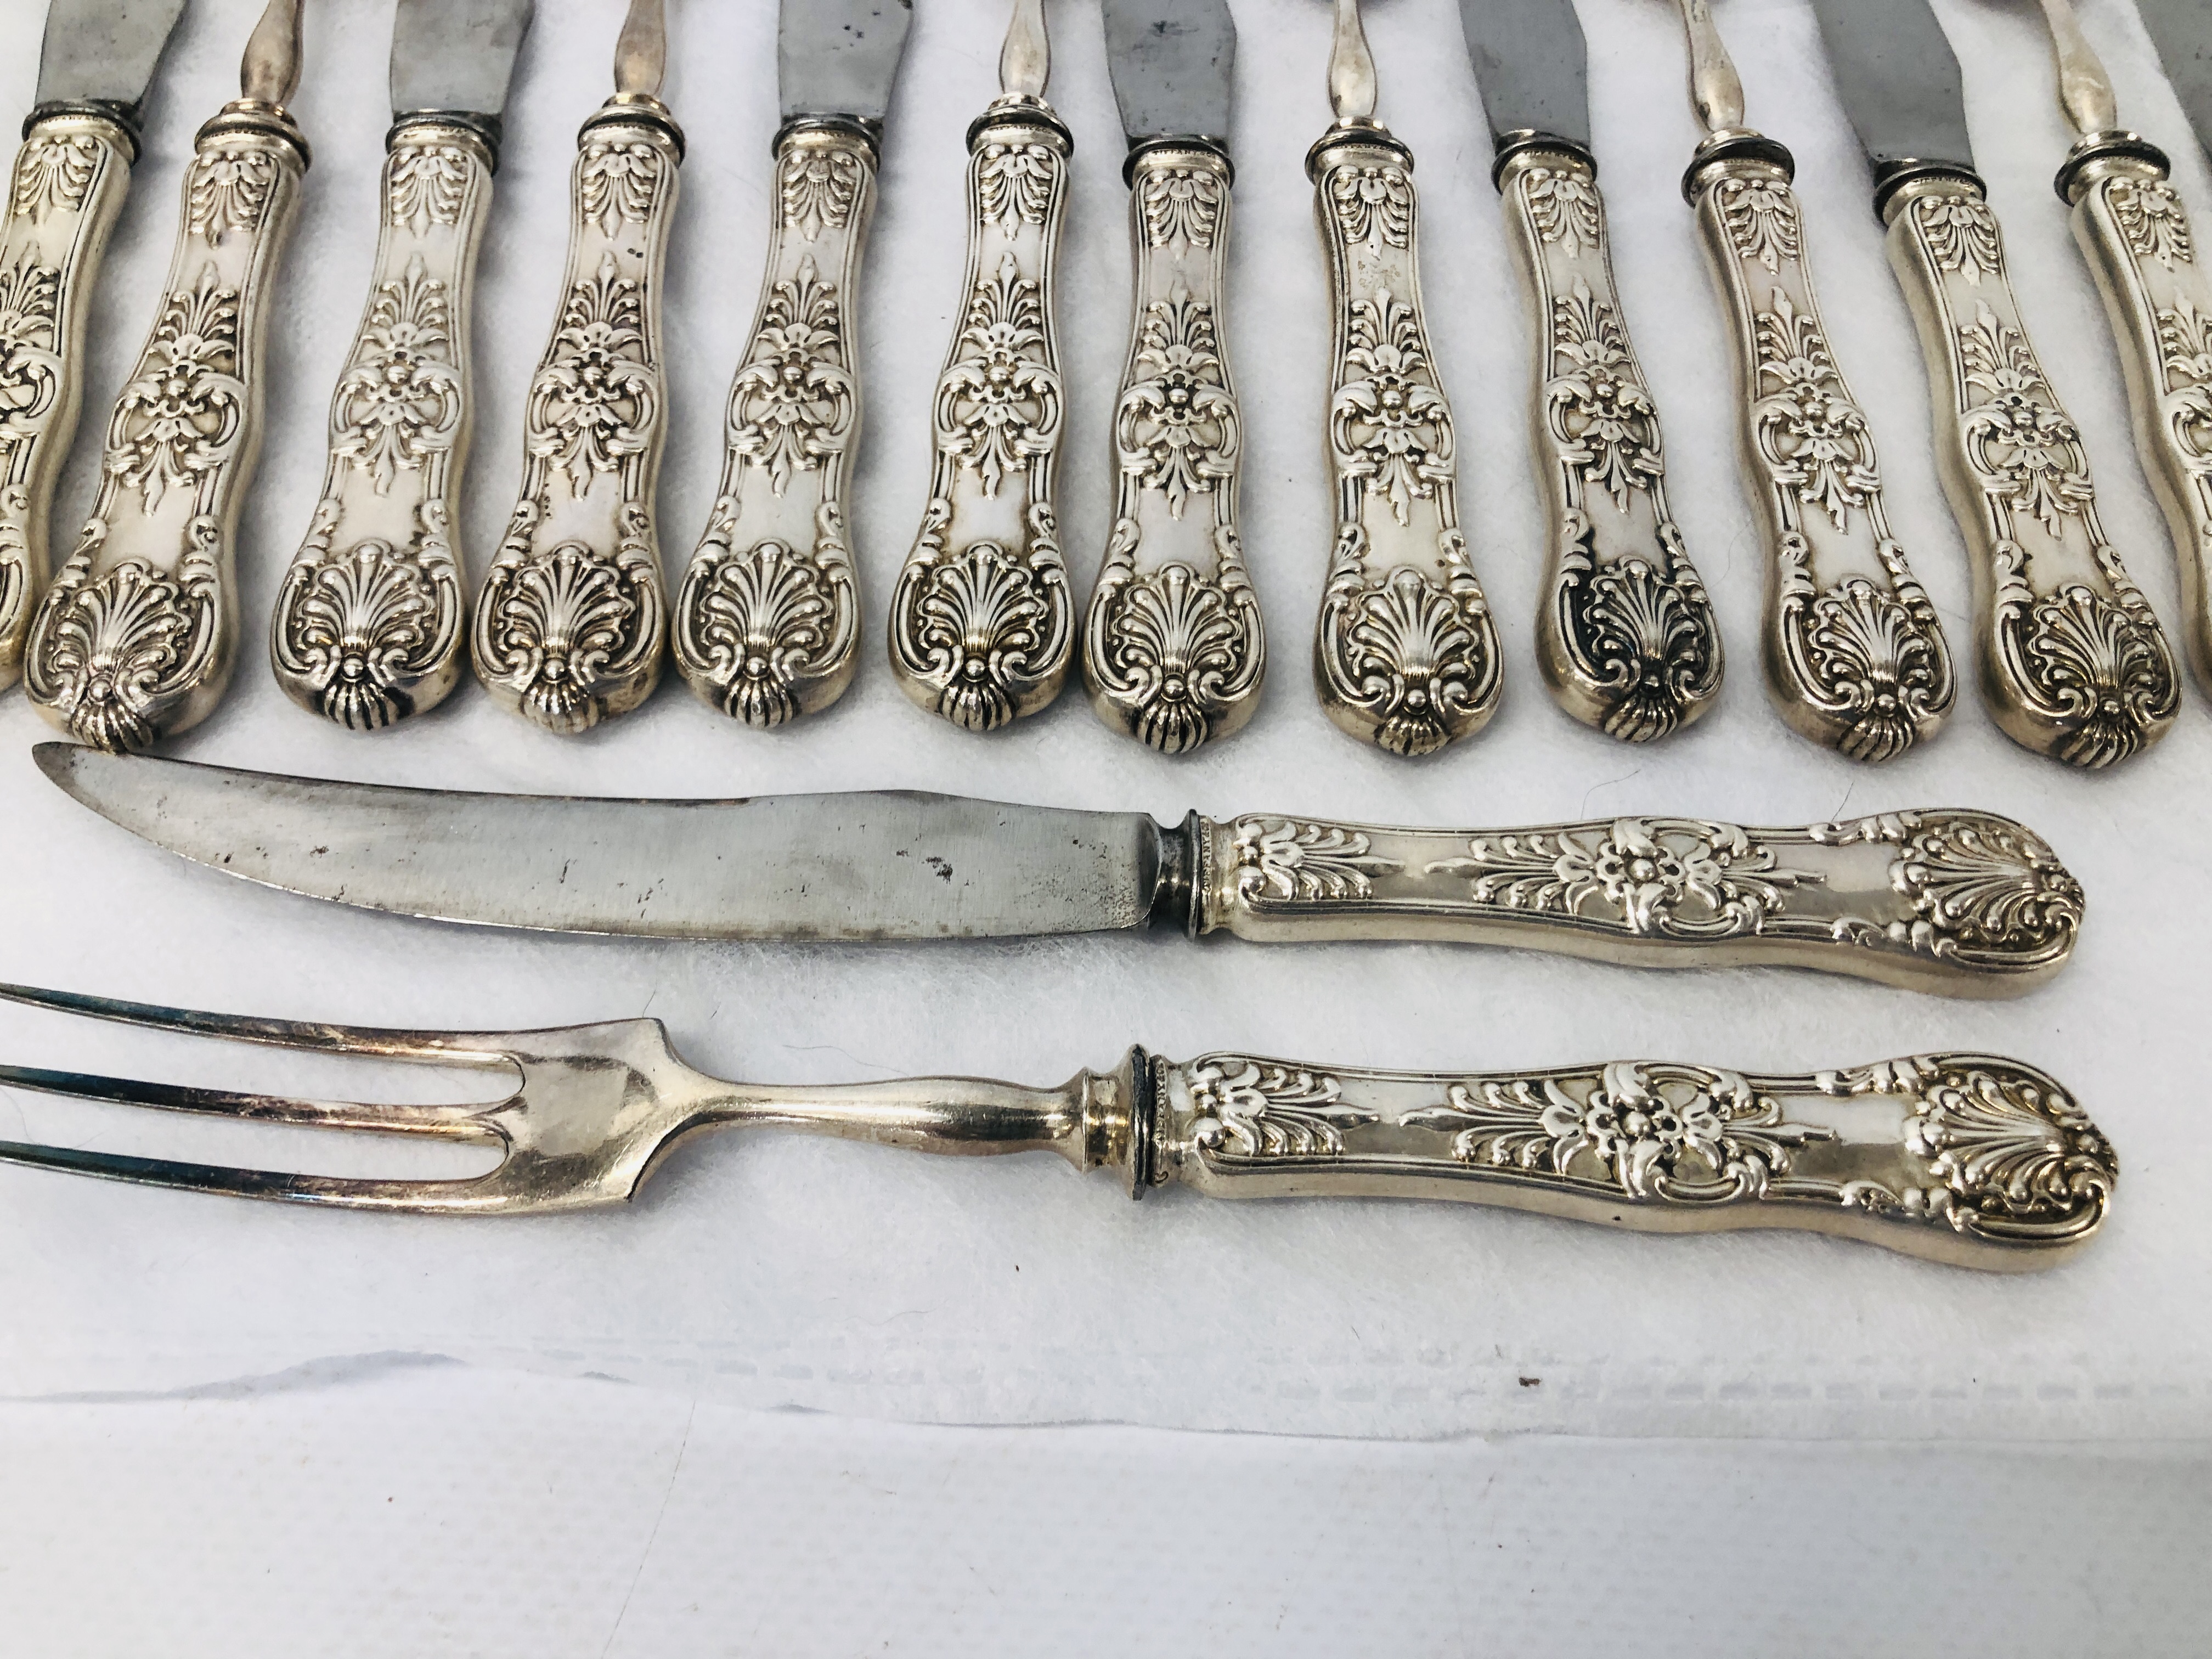 23 PIECES OF TIFFANY & Co SILVER HANDLED DESERT KNIVES AND FORKS - Image 5 of 8